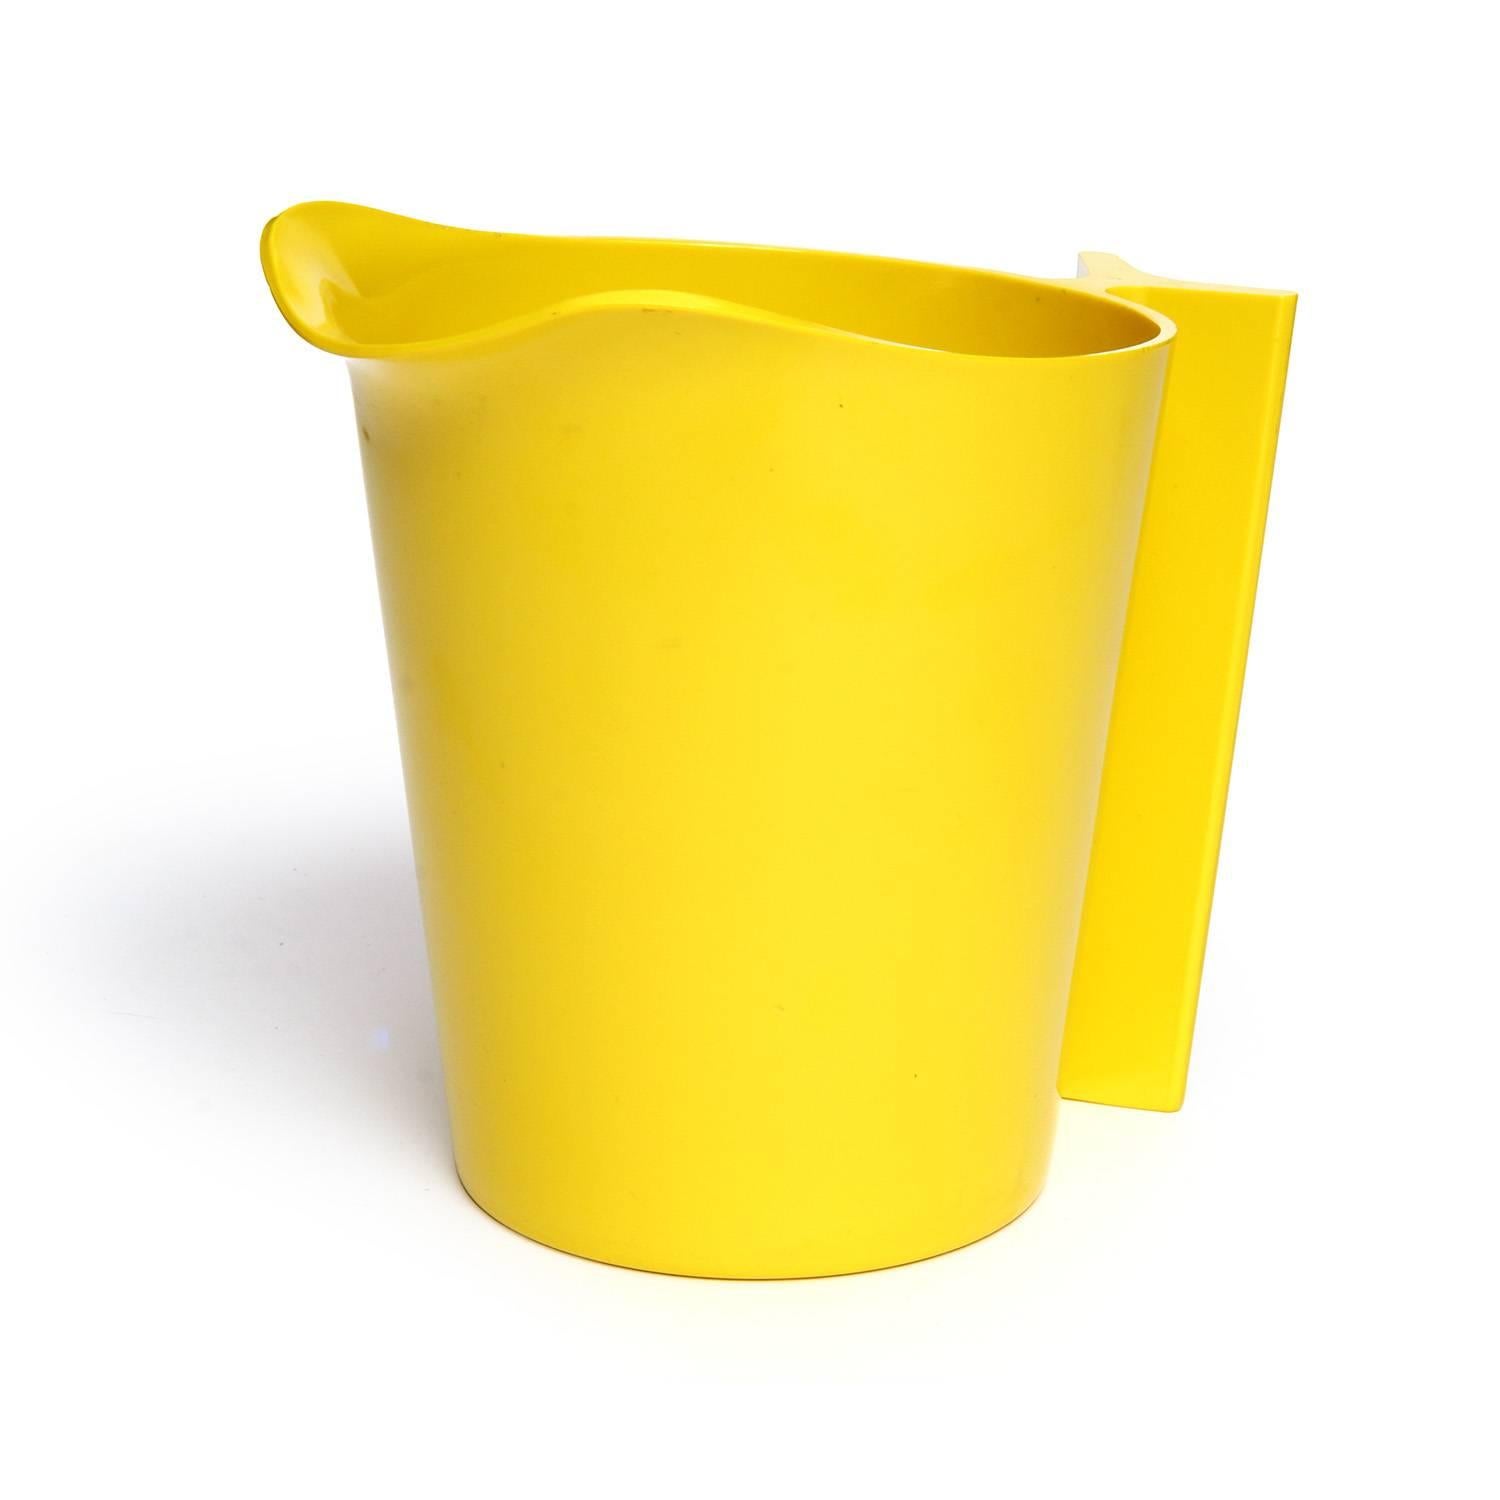 A refined and sculptural set of 5 salad bowls with a serving bowl and utensils crafted in a vibrant yellow plastic.